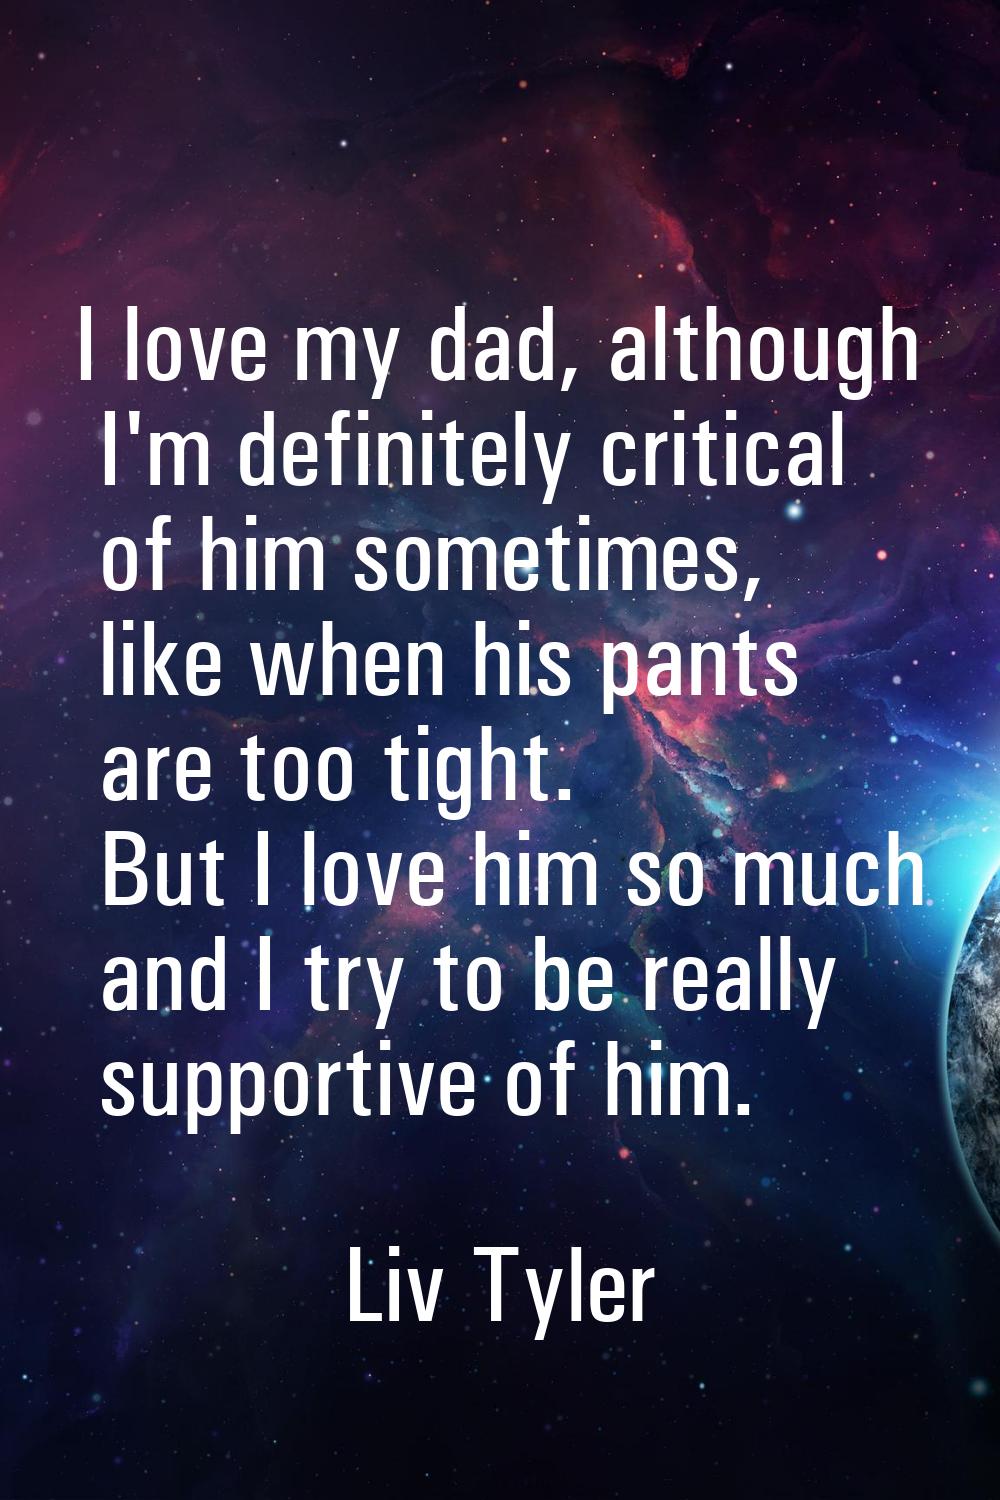 I love my dad, although I'm definitely critical of him sometimes, like when his pants are too tight